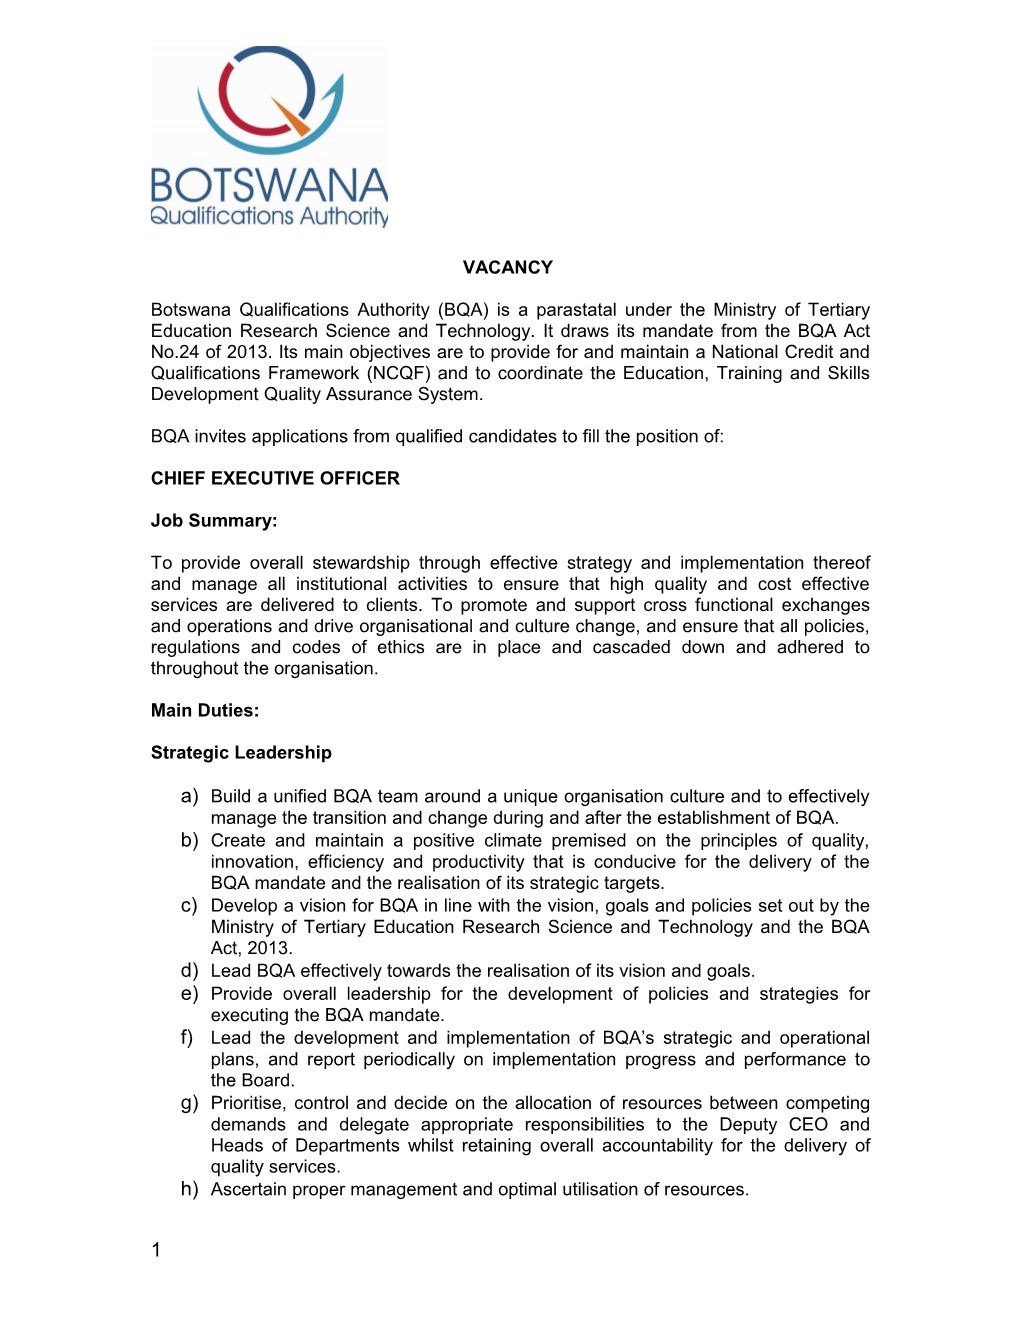 BQA Invites Applications from Qualified Candidates to Fill the Position Of